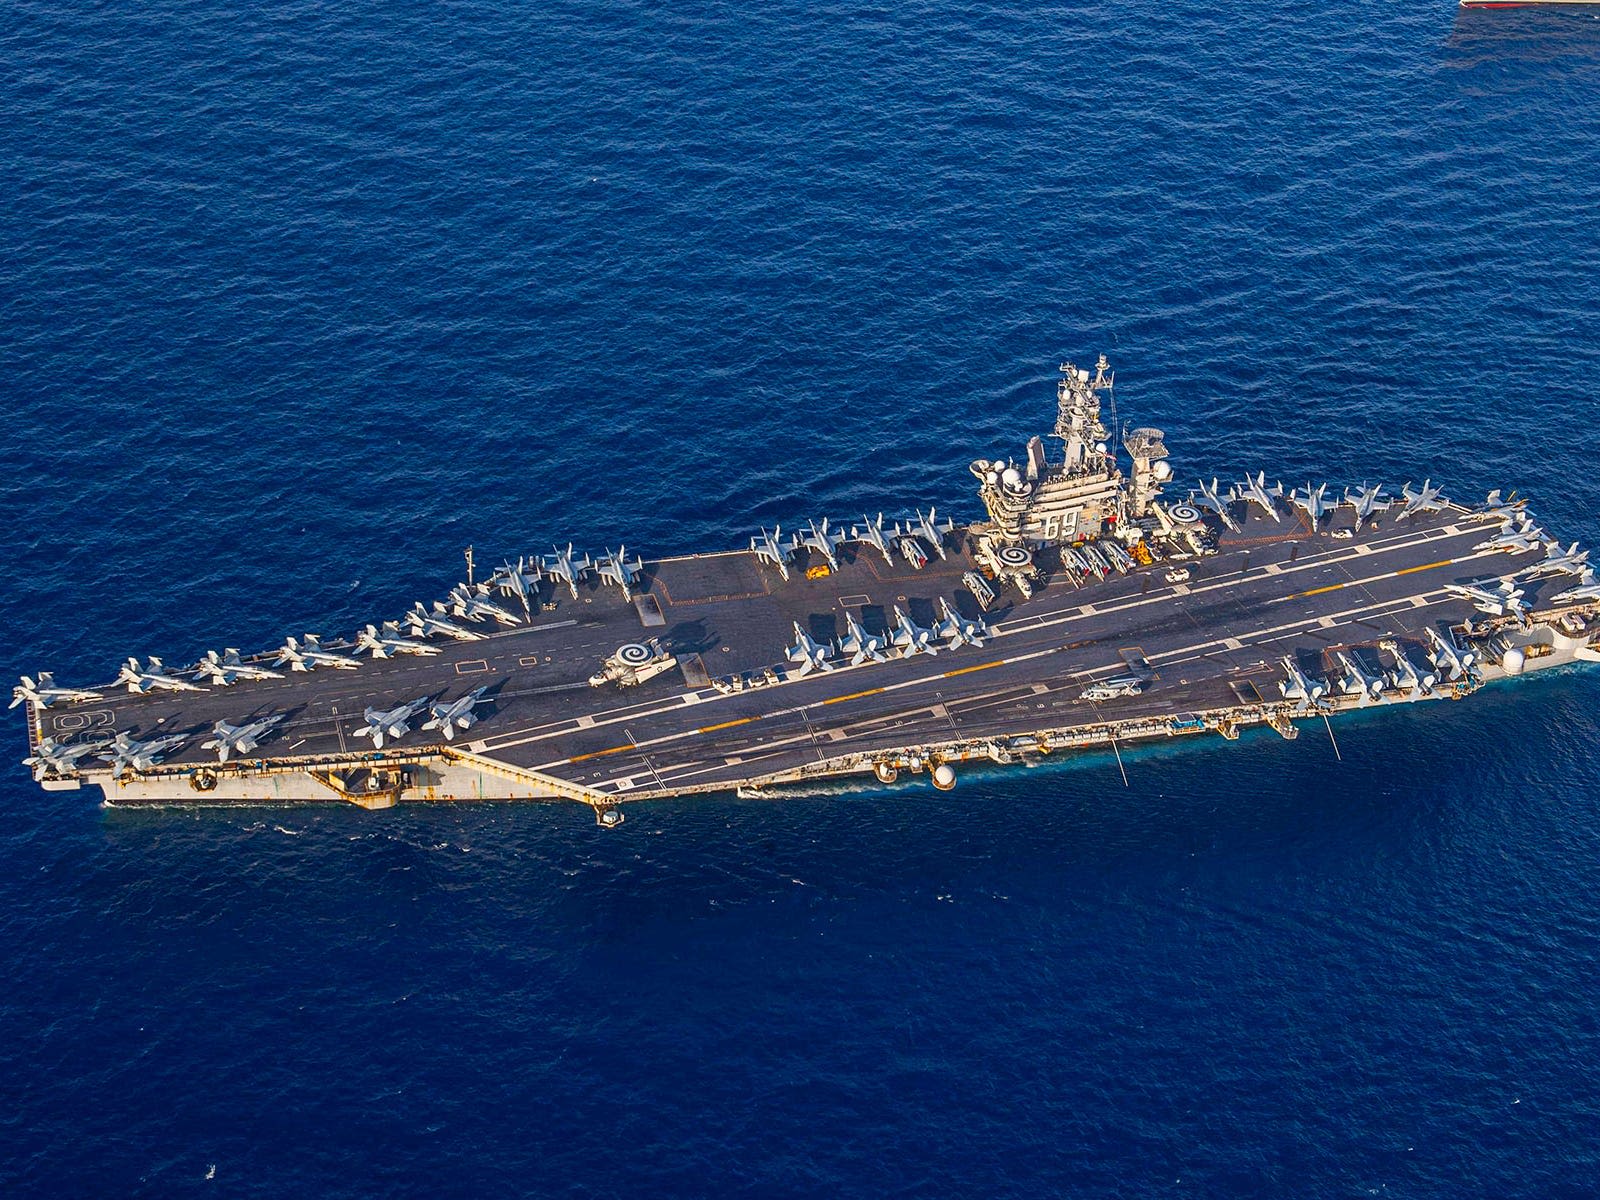 The US Navy carrier strike group fighting off Houthi missiles is staying in the Red Sea for now